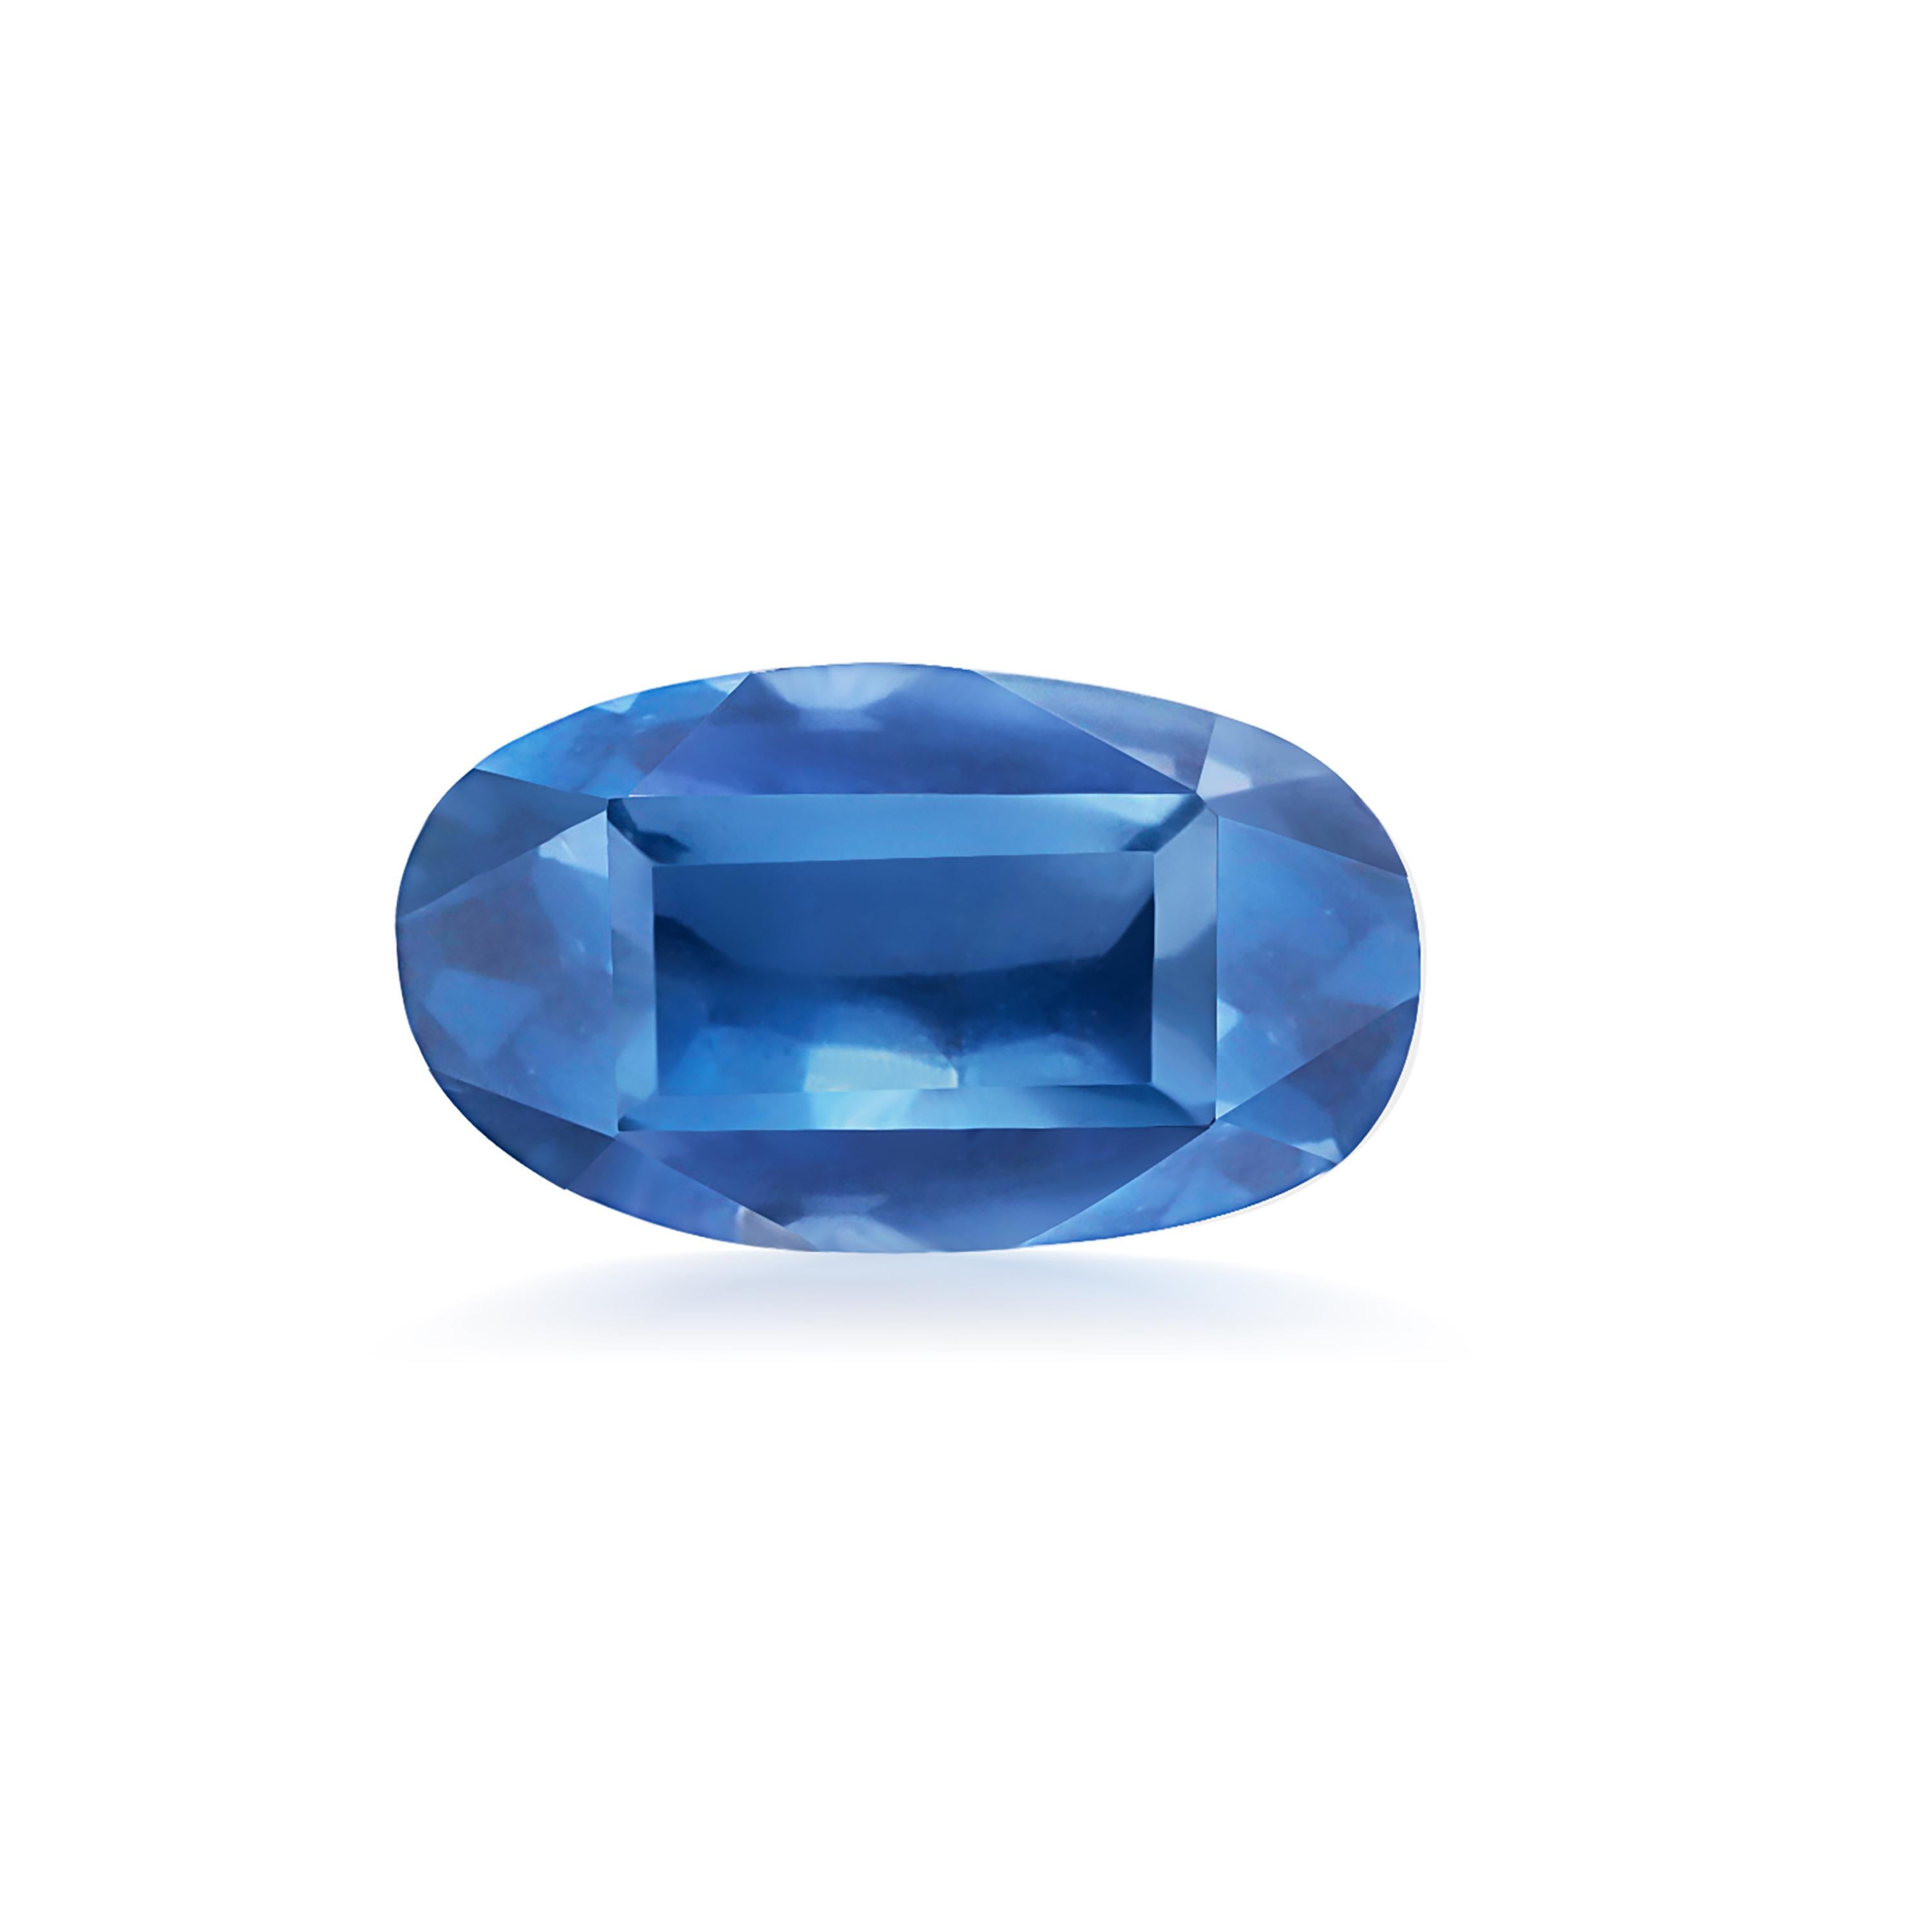 Contemporary GIA Certified No Heat Natural Sapphire Origin Sri Lanka Weighing 2.80 Carat For Sale